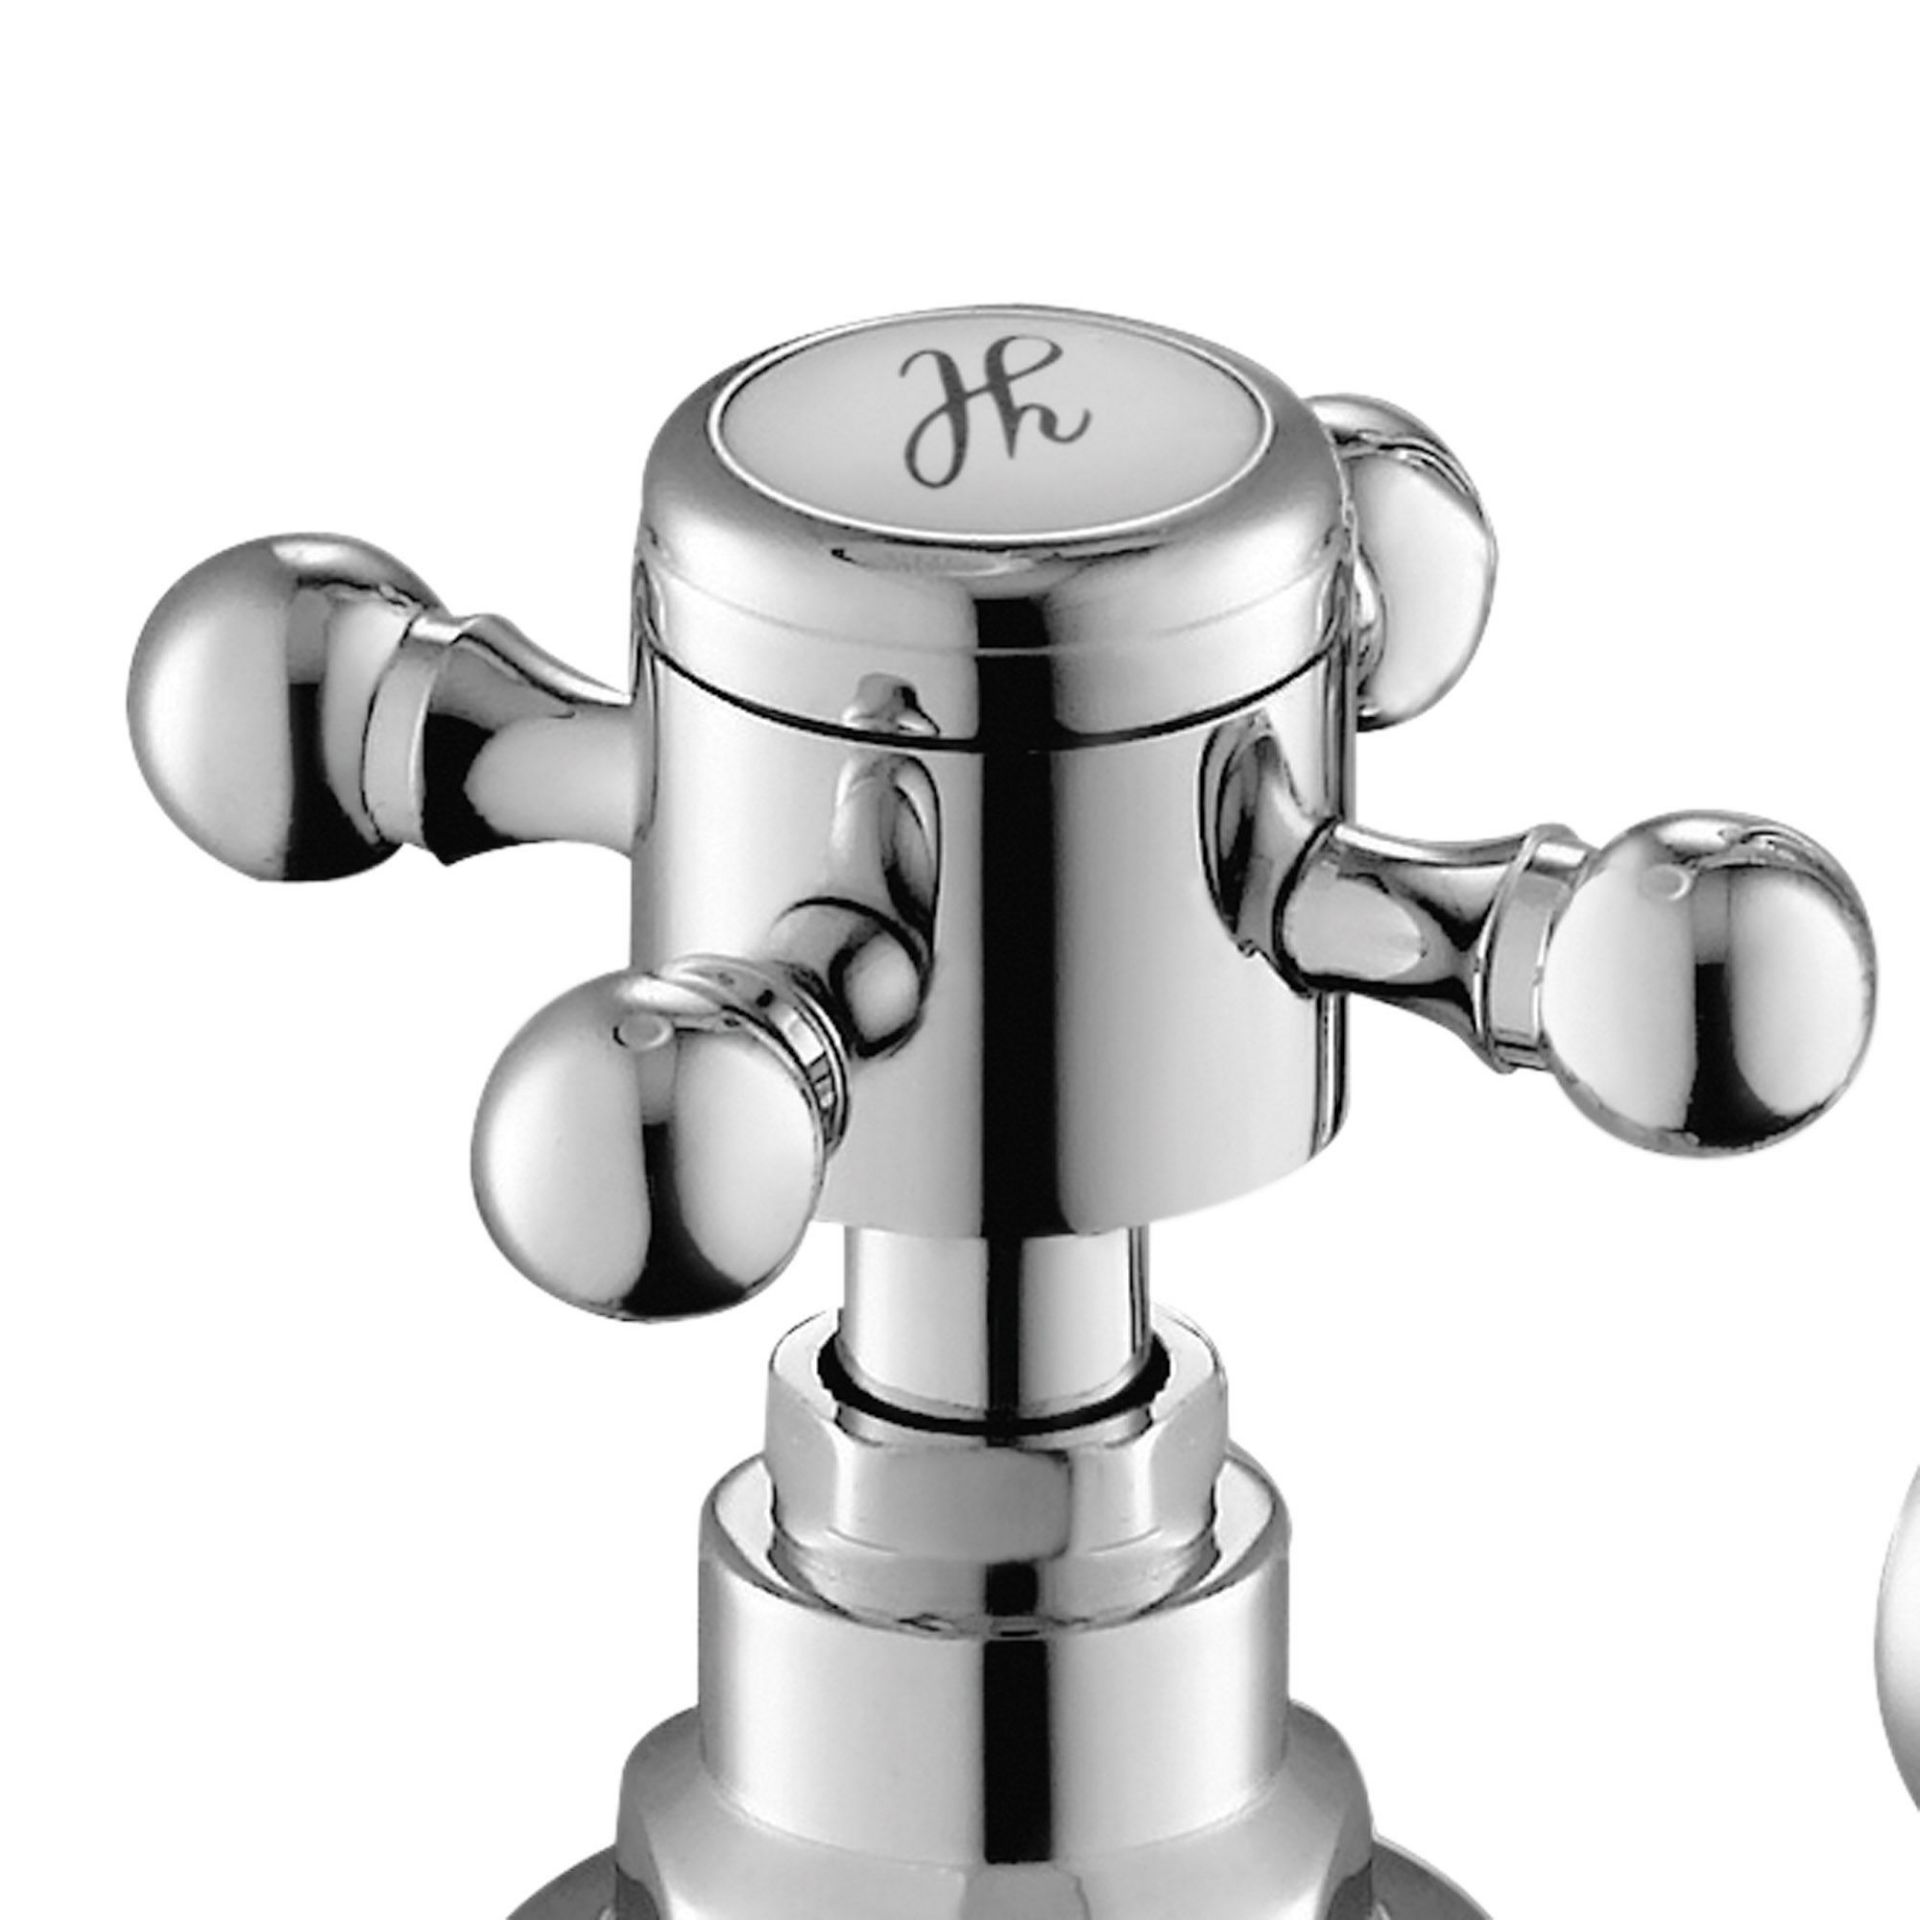 (XM64) Cambridge Bath Shower Mixer - Traditional Tap with Handheld Shower We love this because it - Image 3 of 4